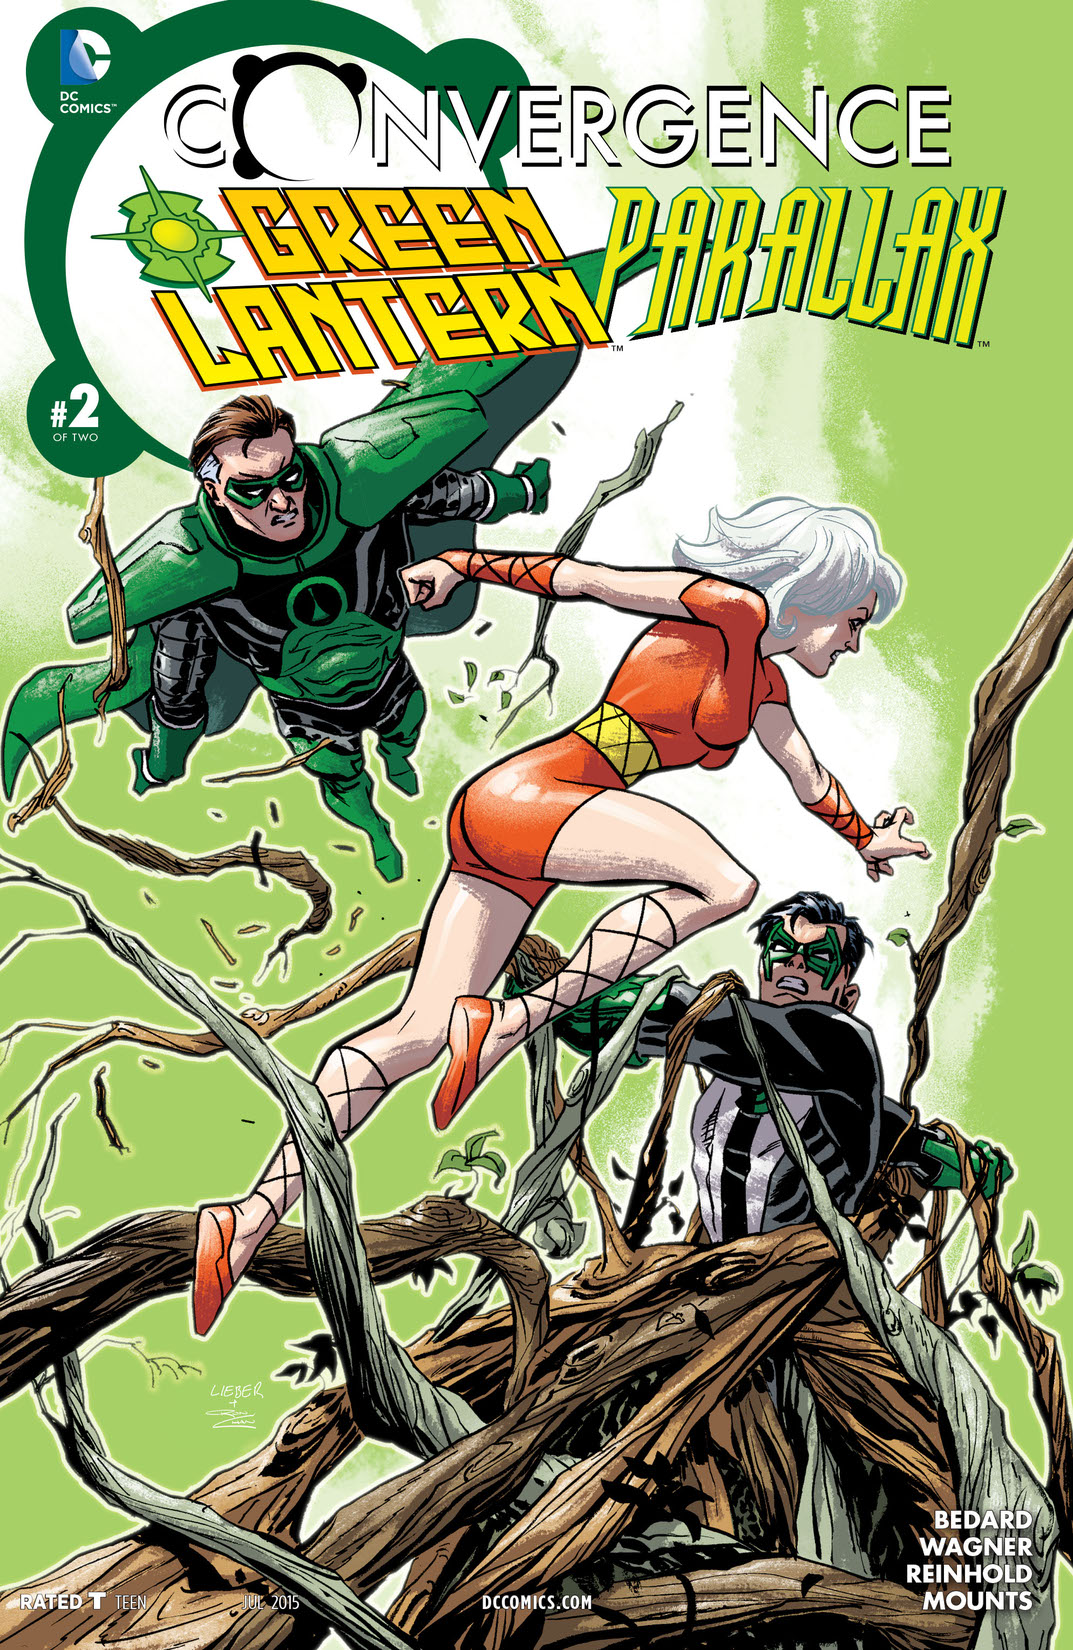 Convergence: Green Lantern/Parallax #2 preview images